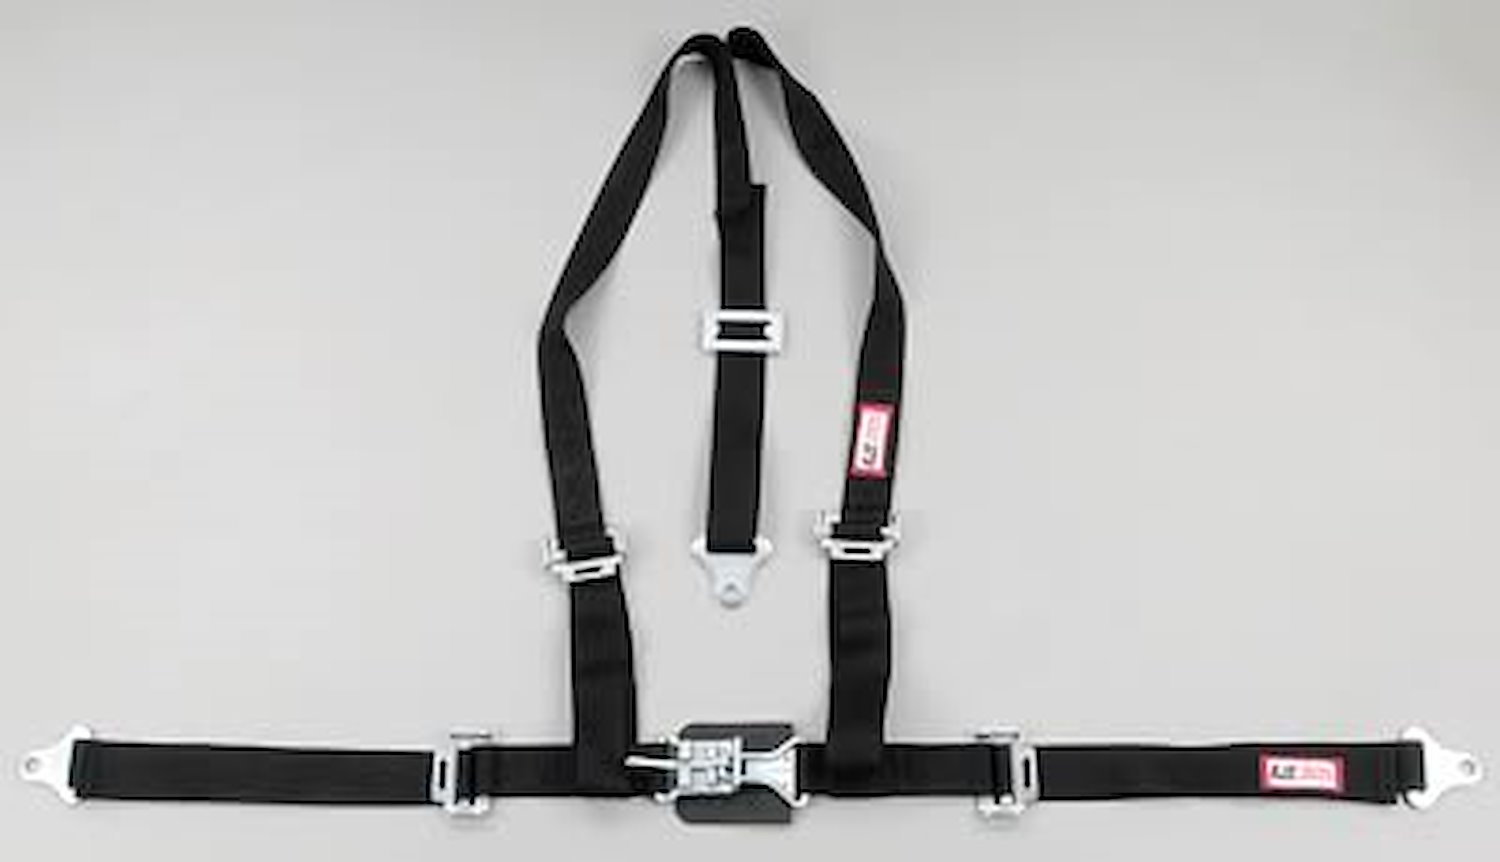 NON-SFI L&L HARNESS 2 PULL DOWN Lap Belt SNAP SEWN IN 2 S.H. Y FLOOR Mount WRAP/SNAP GRAY